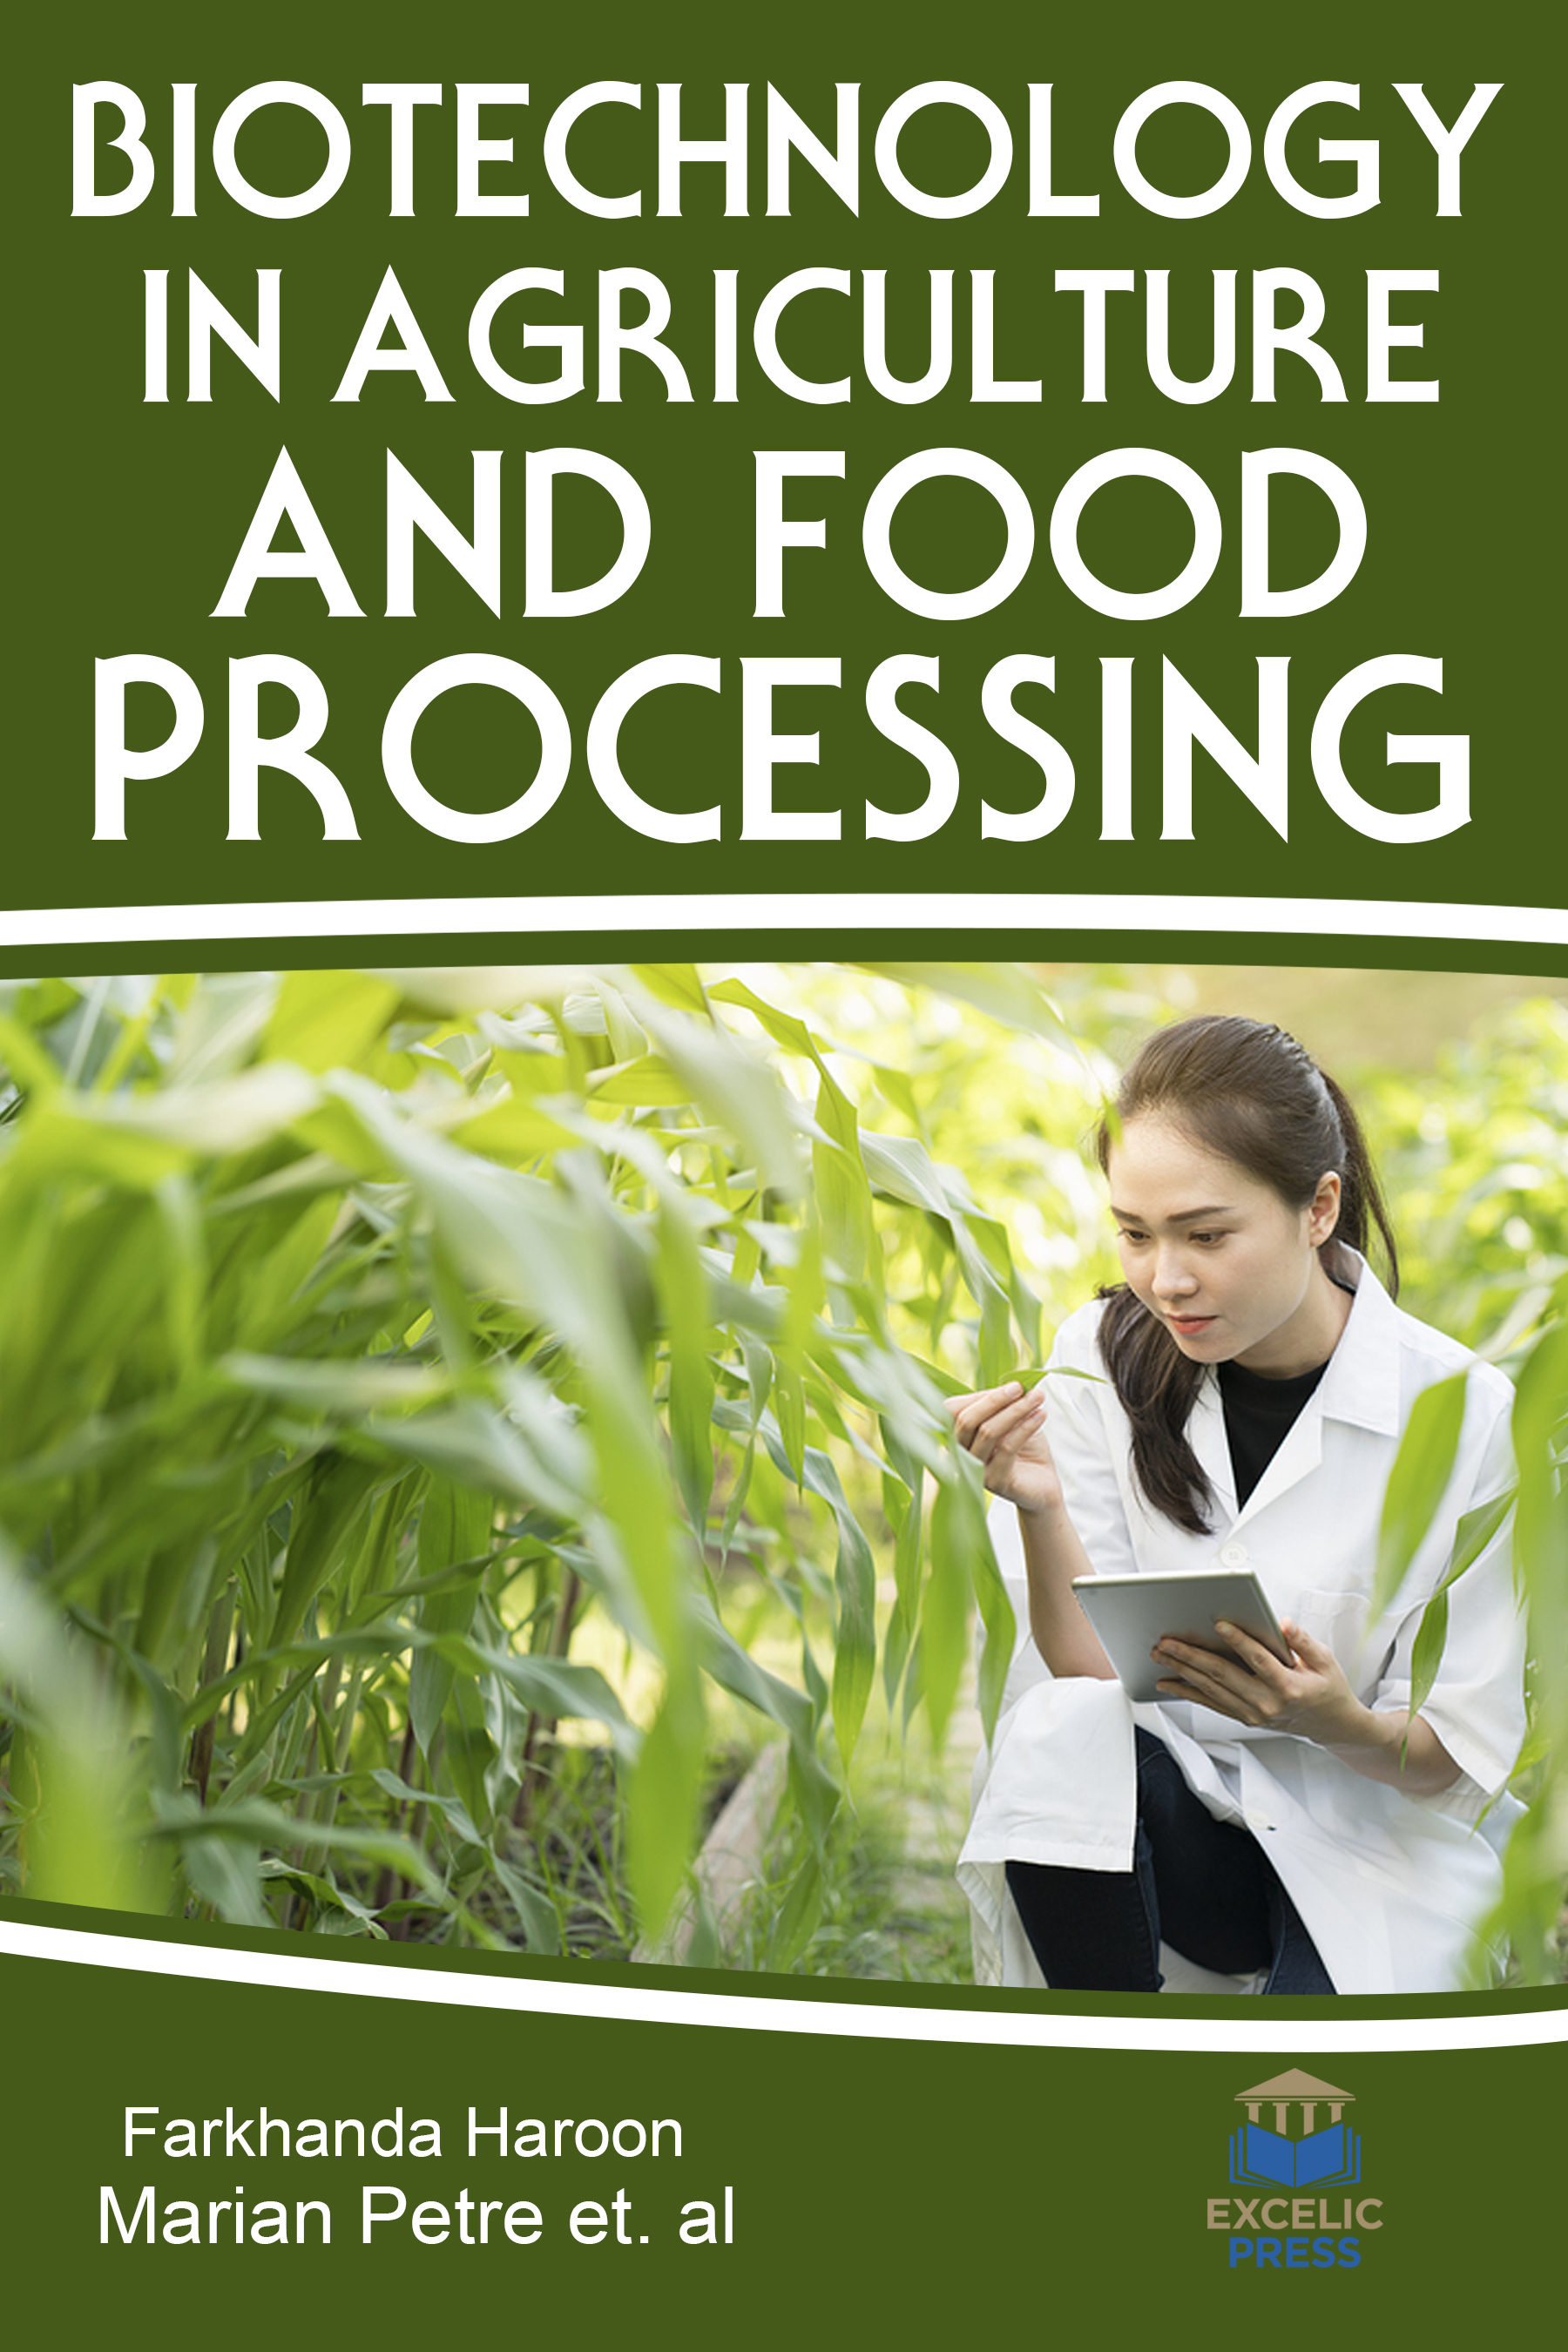 Biotechnology in Agriculture and Food Processing Excelic Press